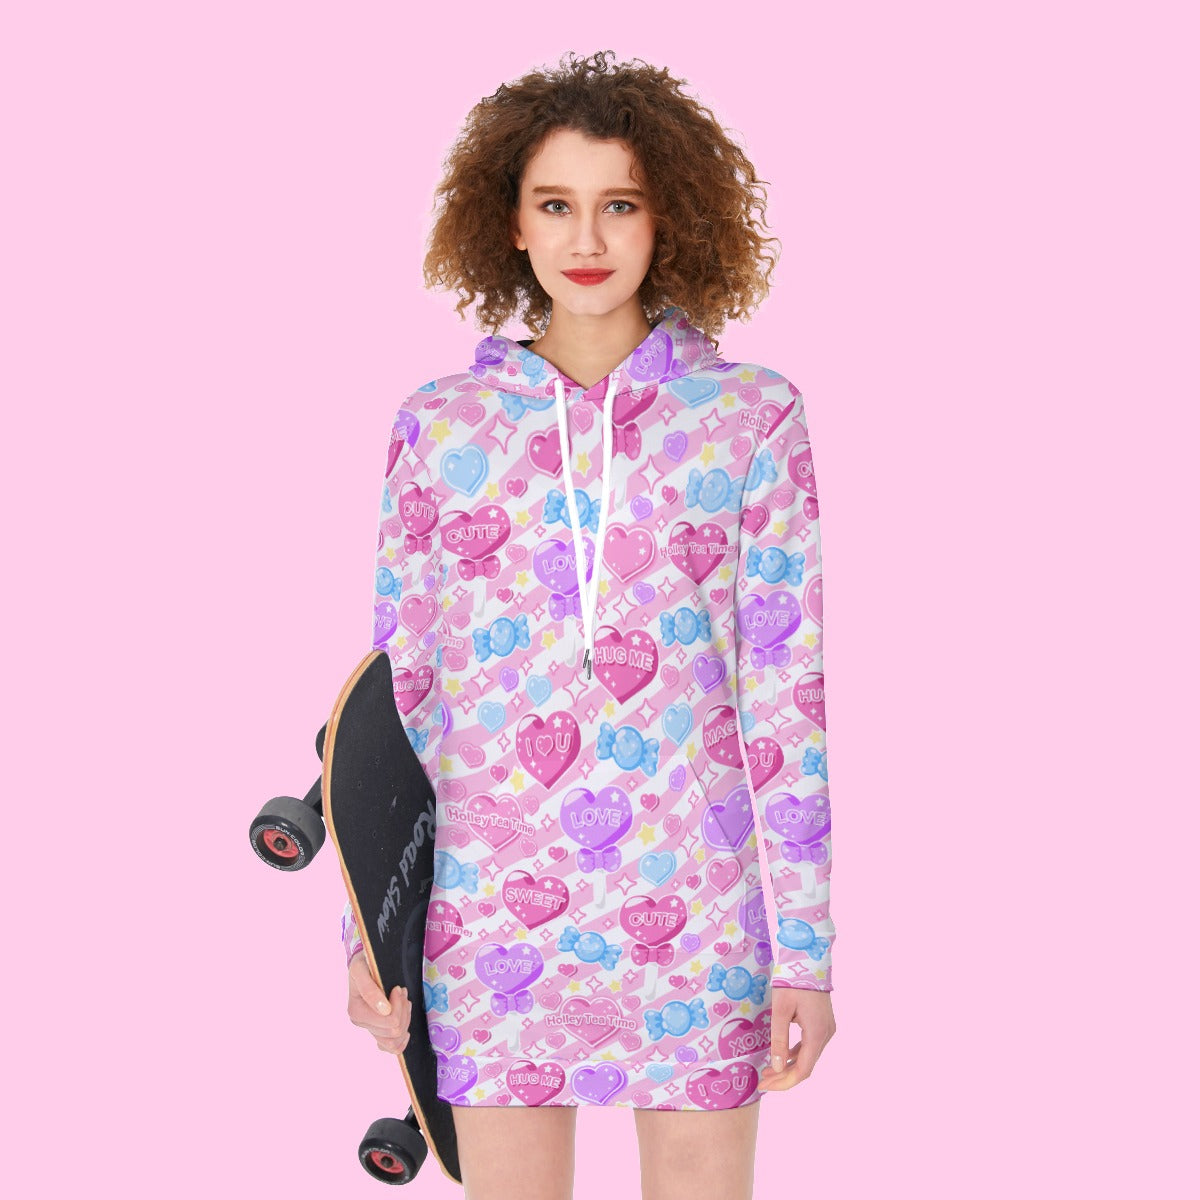 Candy Love Hearts (Colorful Cutie) Women's Long Hoodie